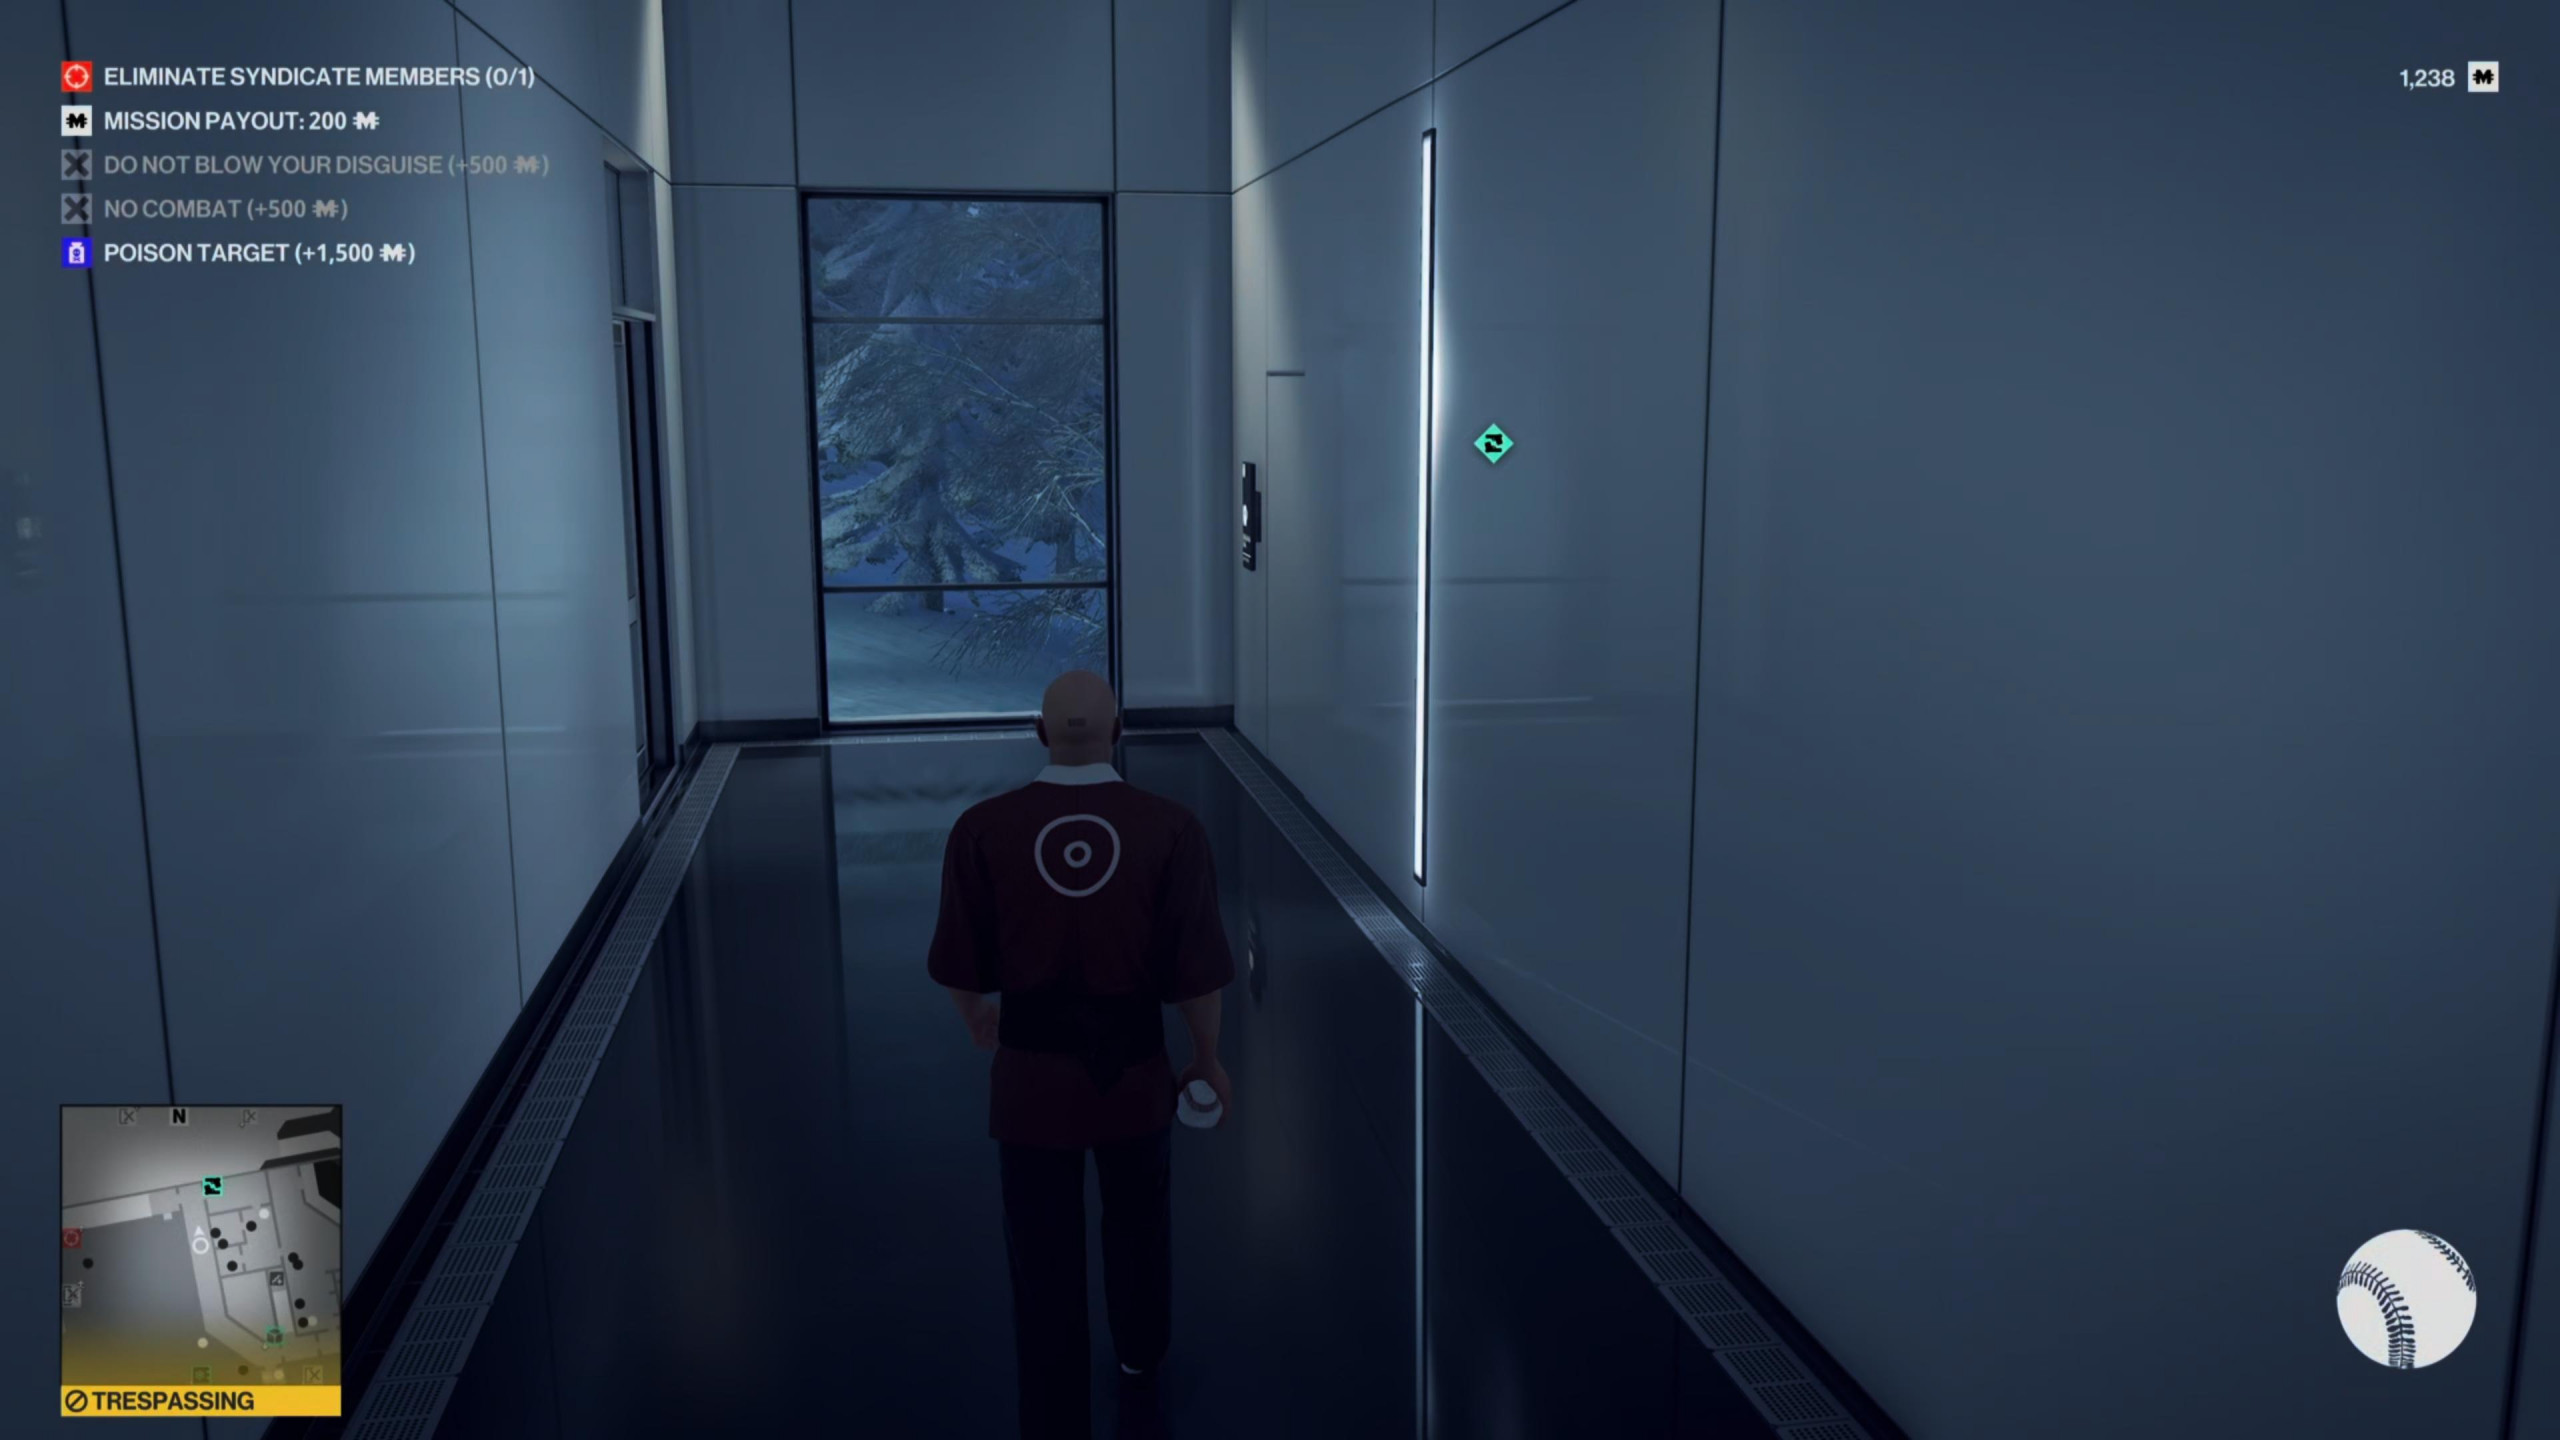 HITMAN Freelancer Review: Carve Your Own Path (PS5) - KeenGamer